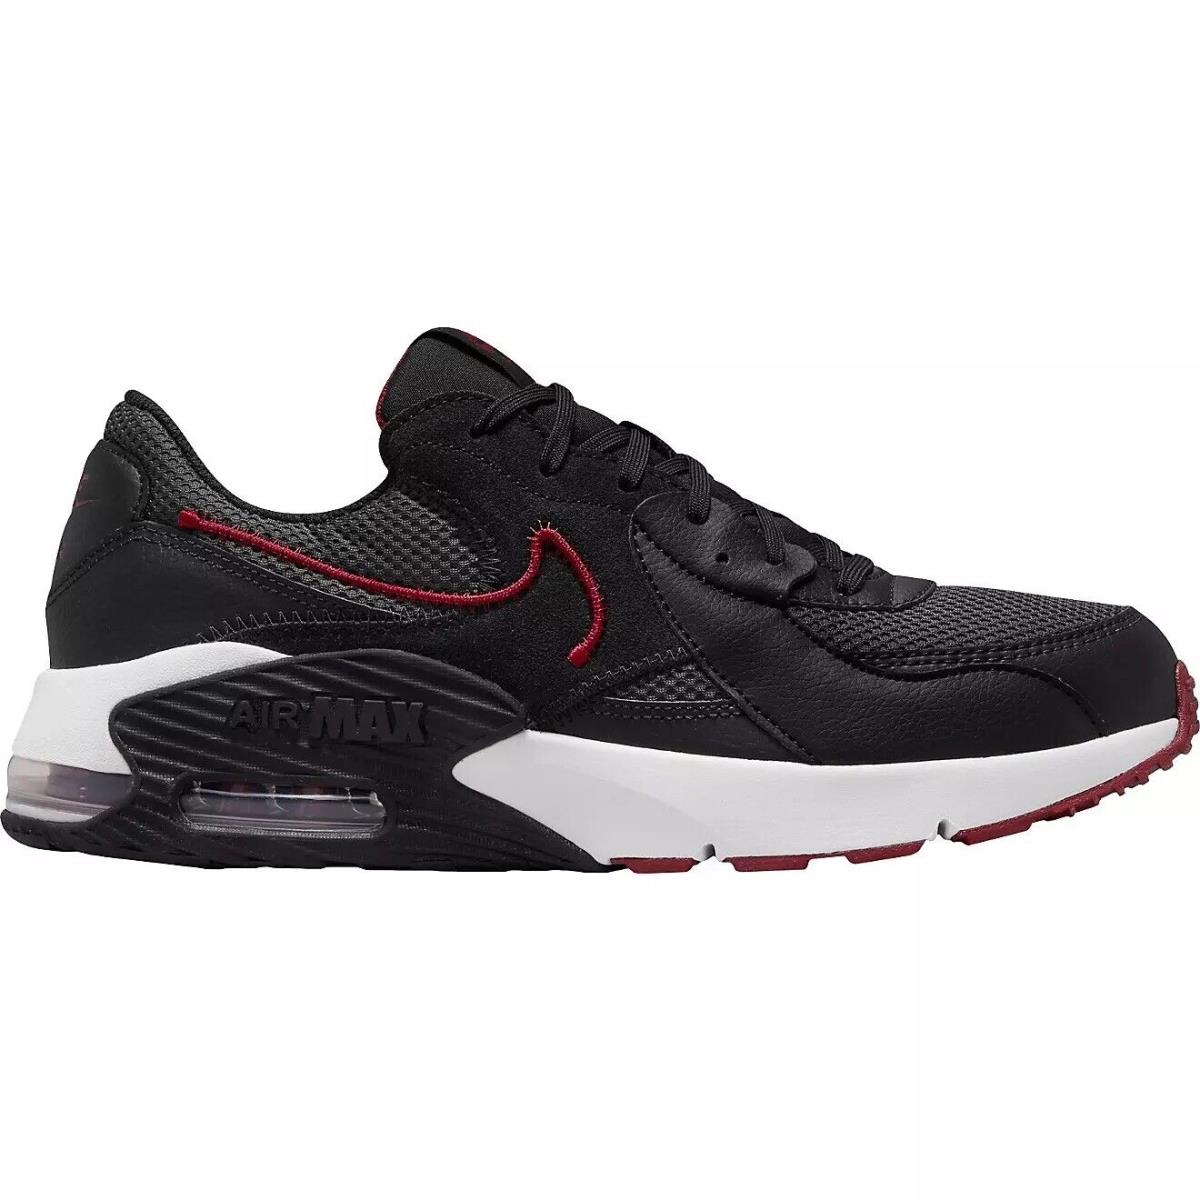 Mens Nike Air Max Excee Running Shoes Sneakers Black White Maroon DQ3993 001